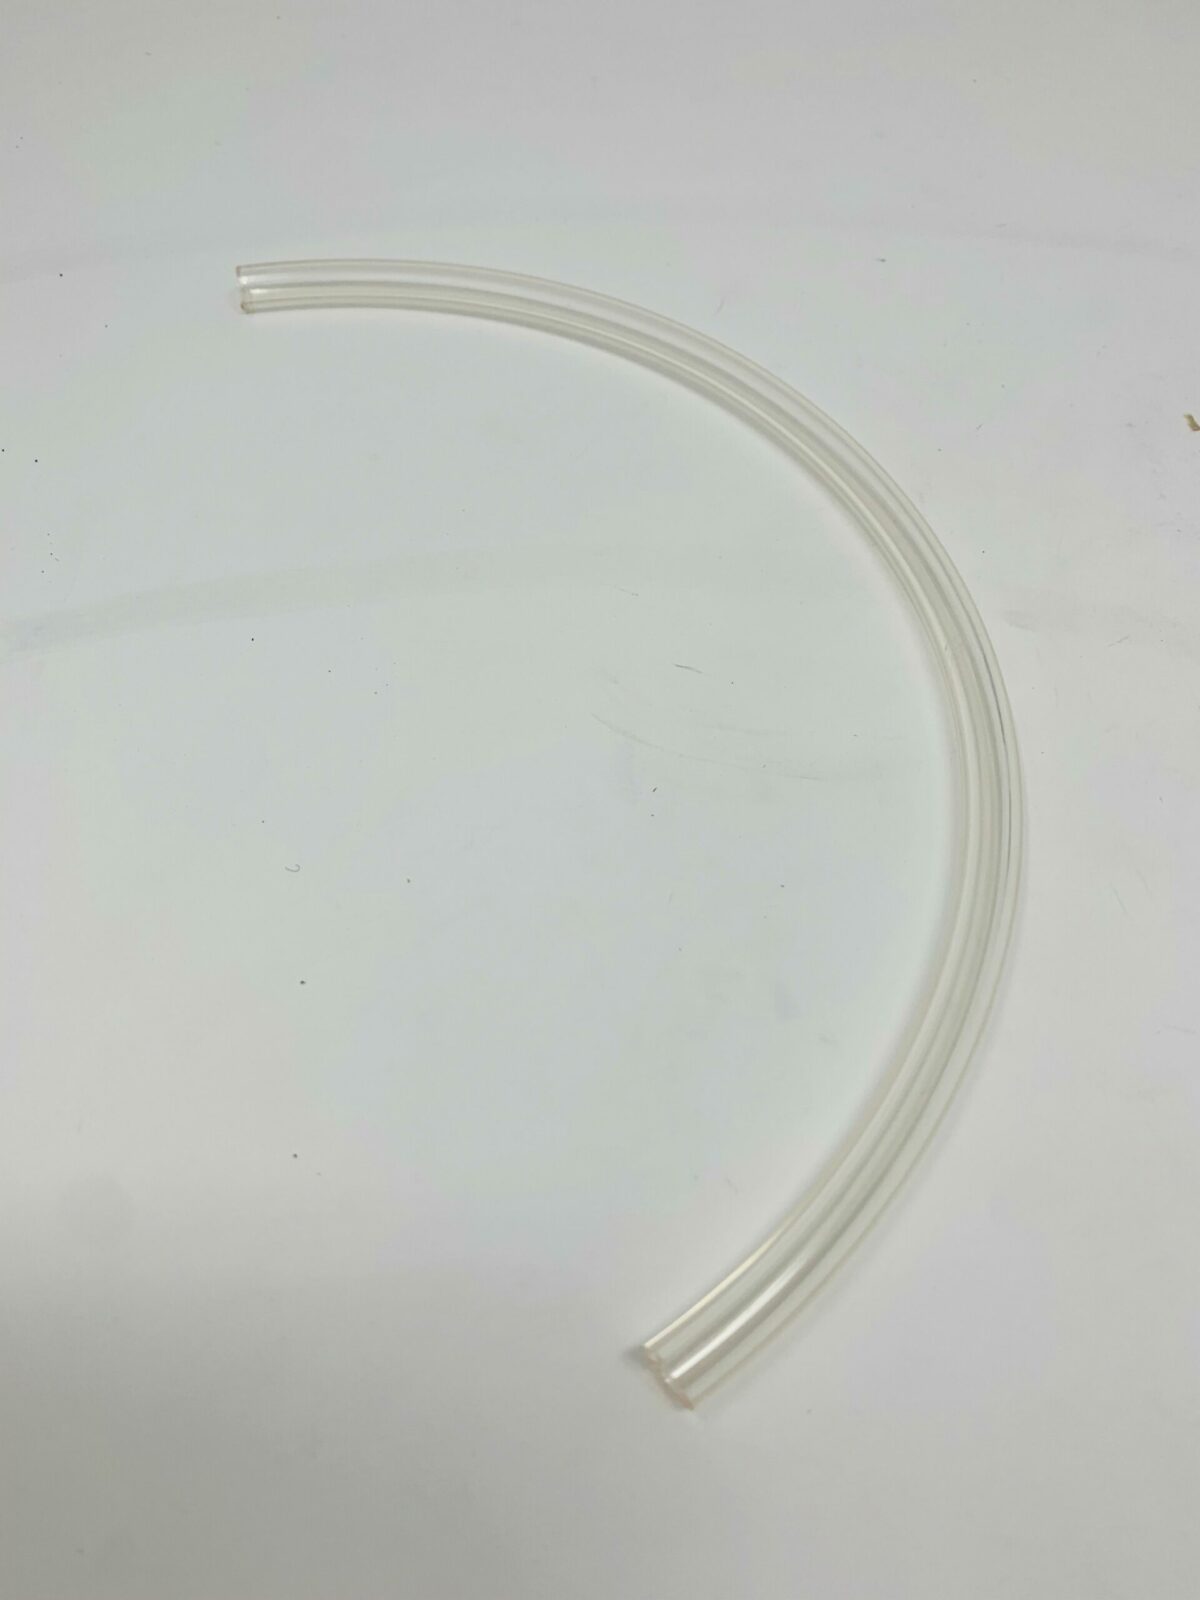 1/4 inch Fuel Line